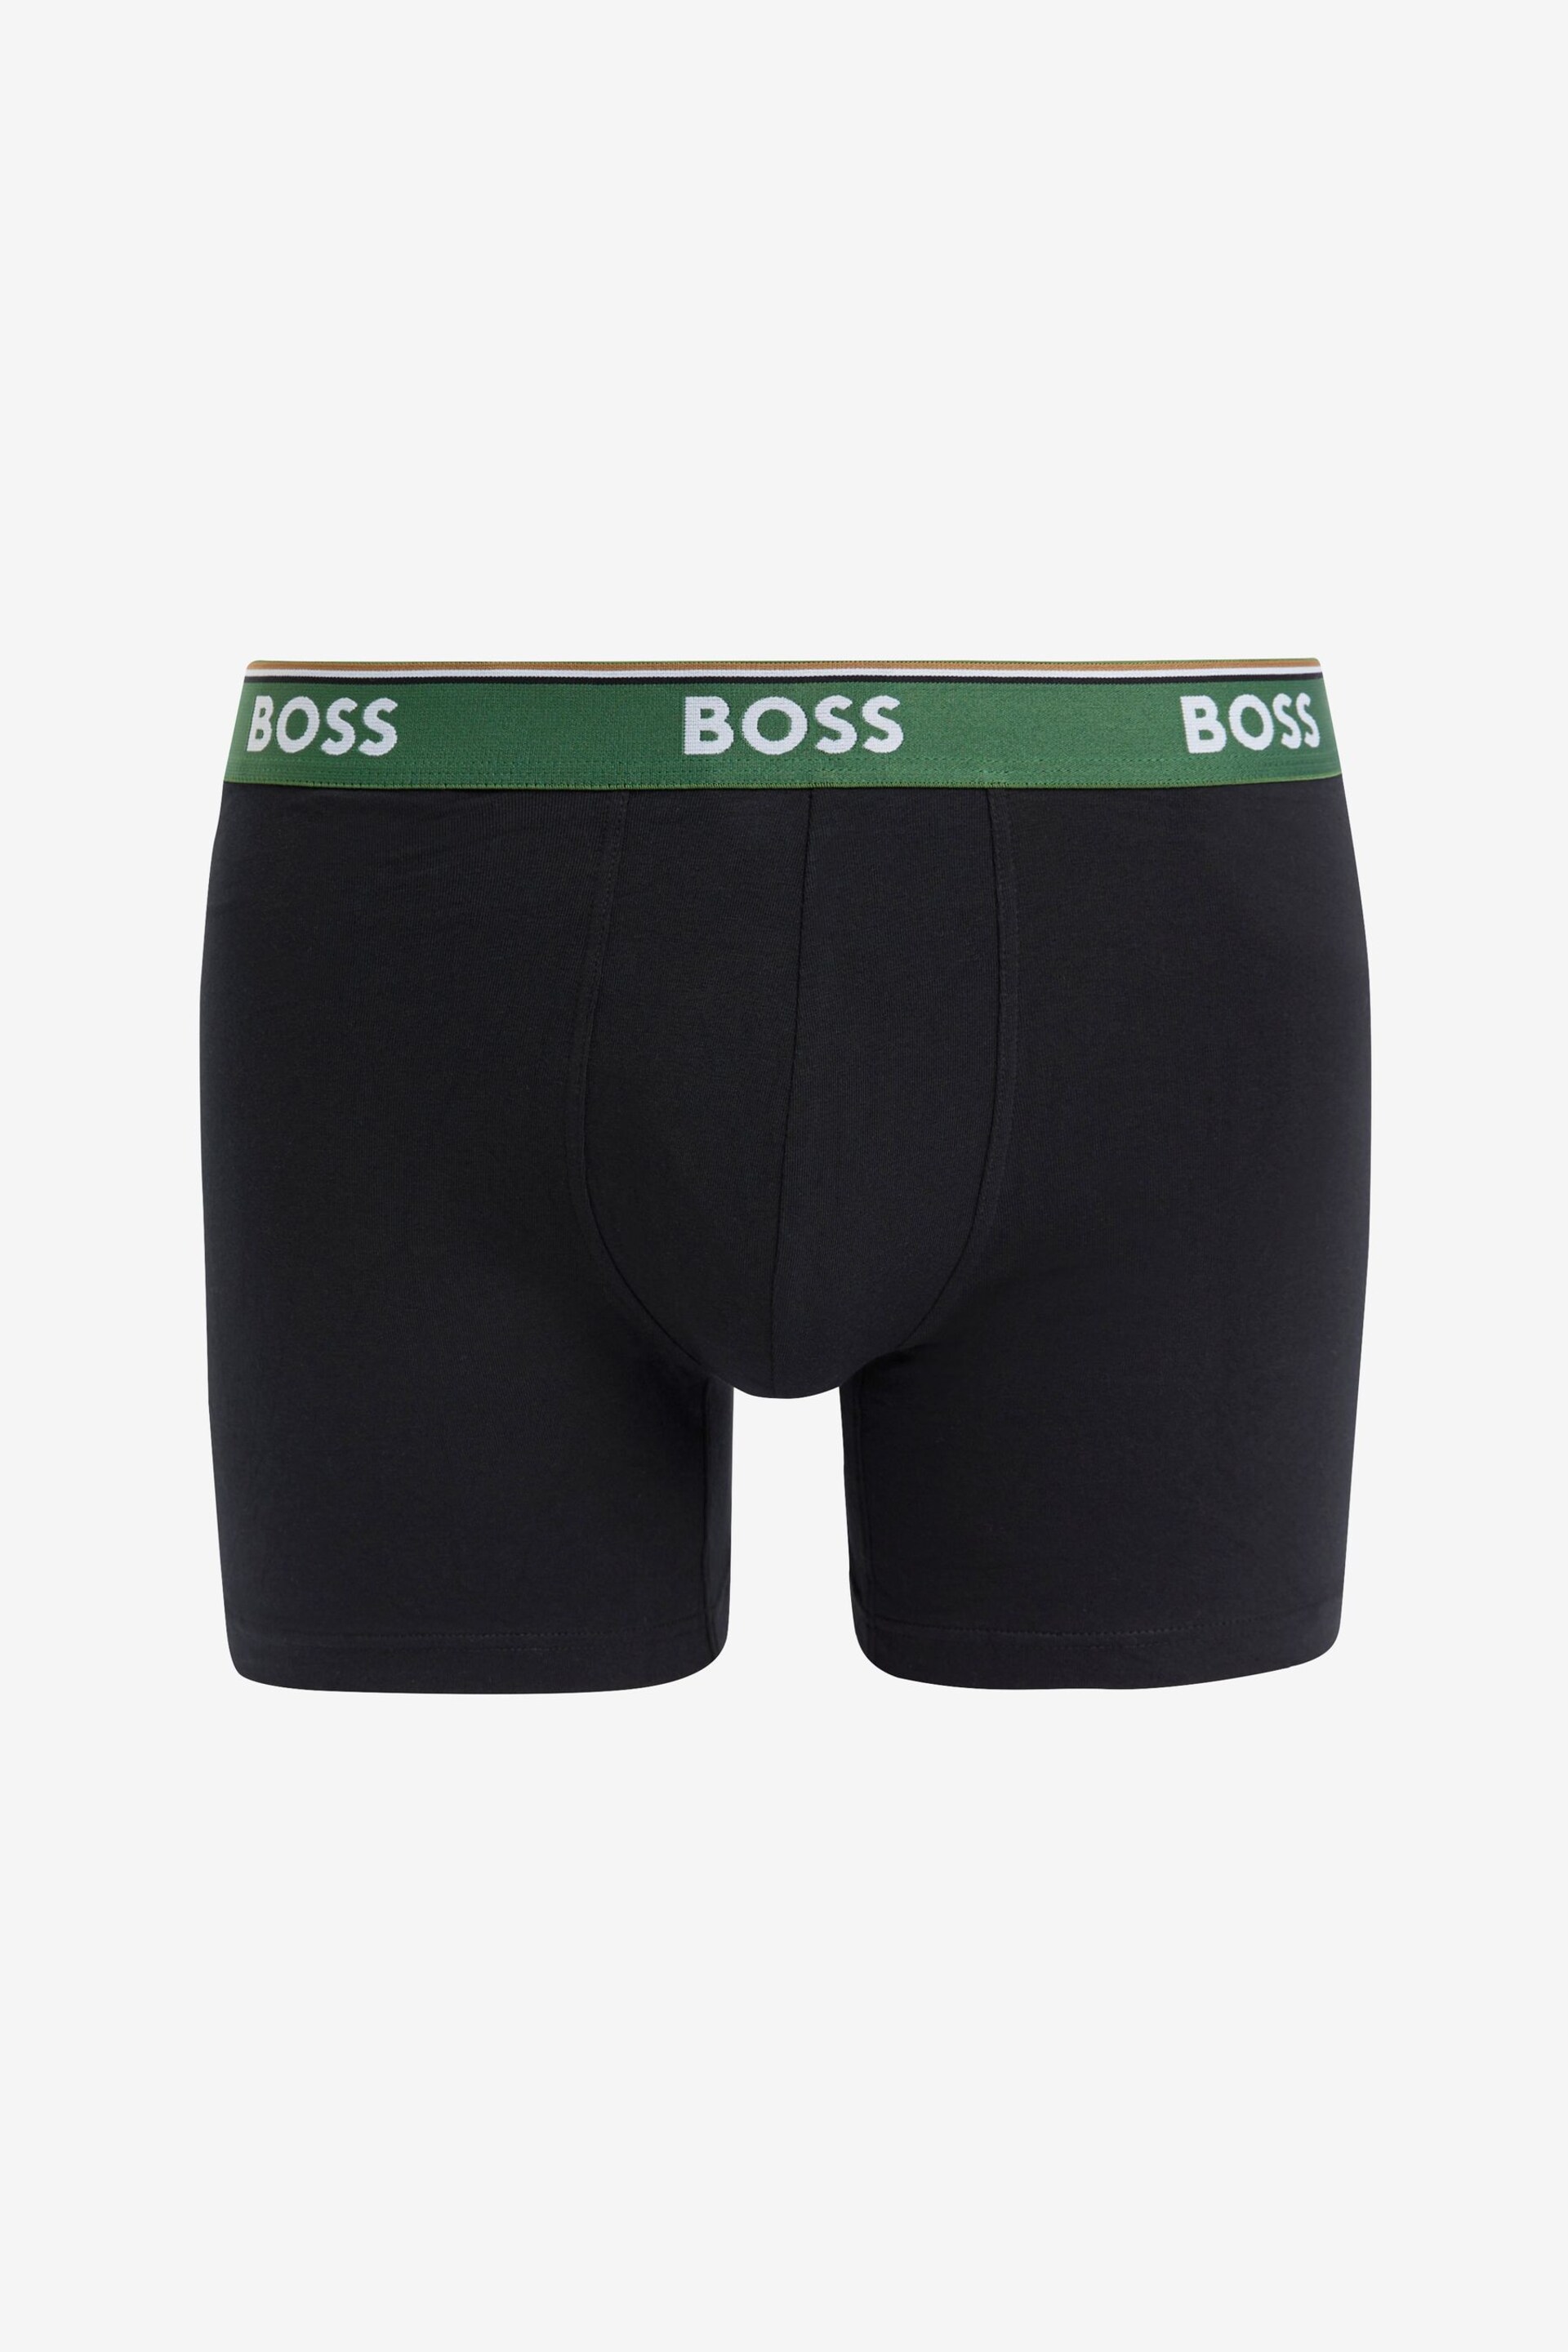 BOSS Black of Stretch-Cotton Boxer Briefs 3 Pack With Logos - Image 4 of 10